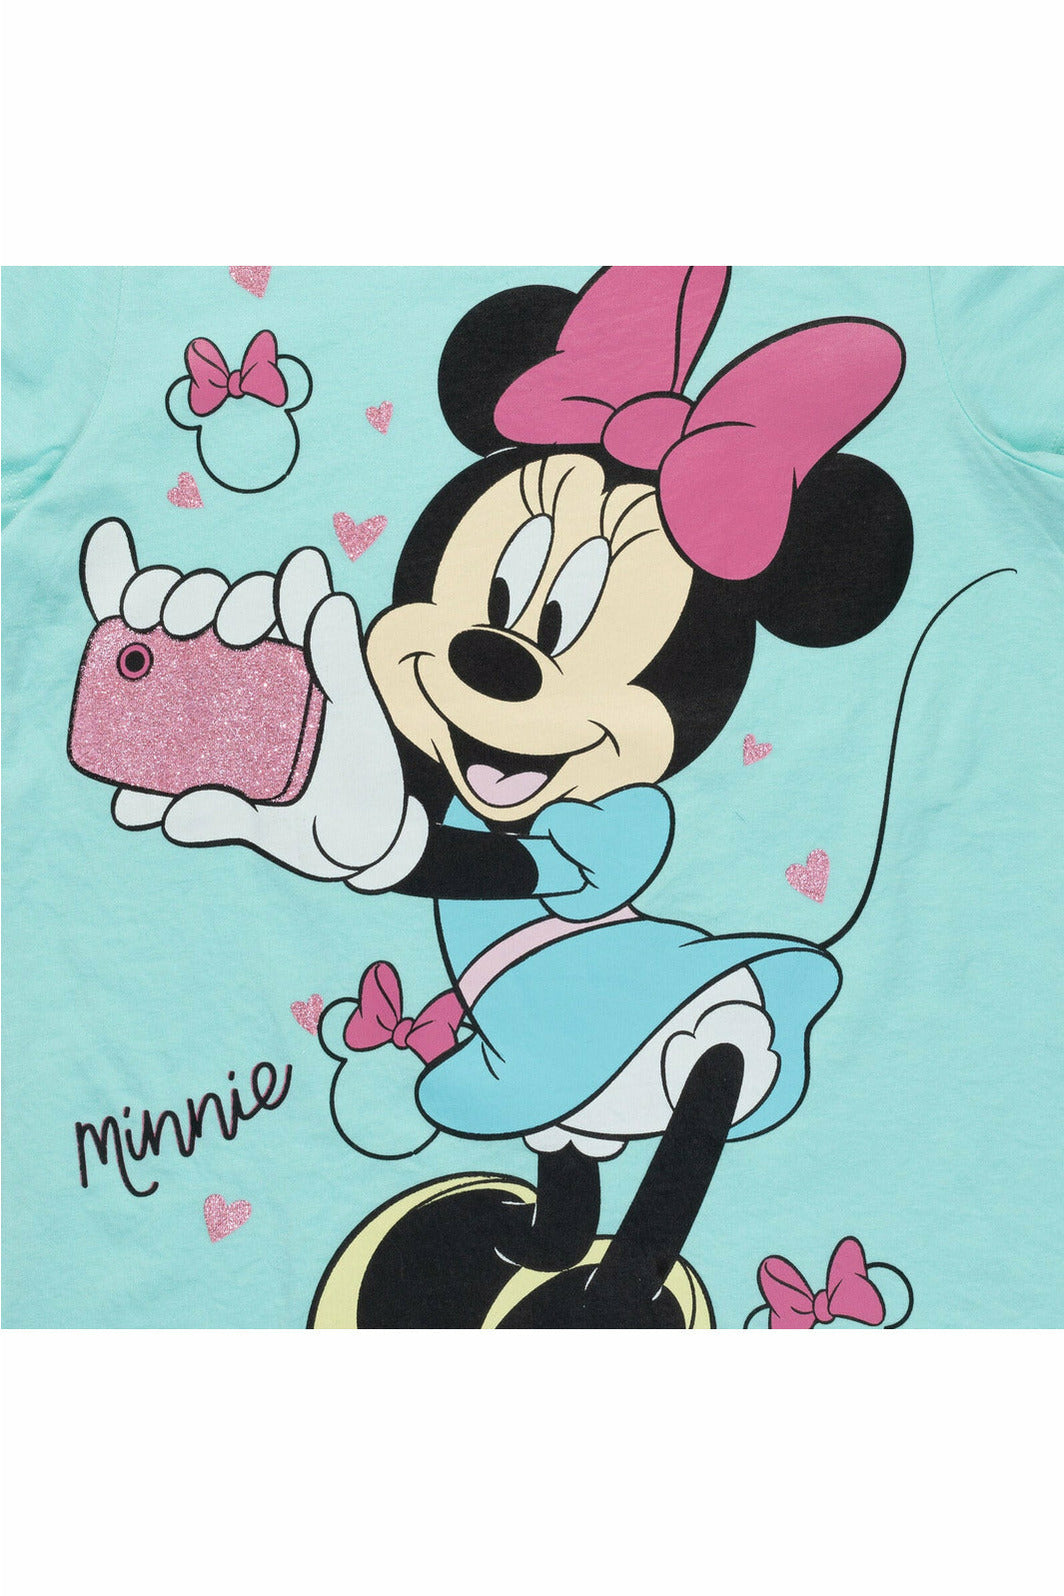 Minnie Mouse 3 Pack Graphic T-Shirts